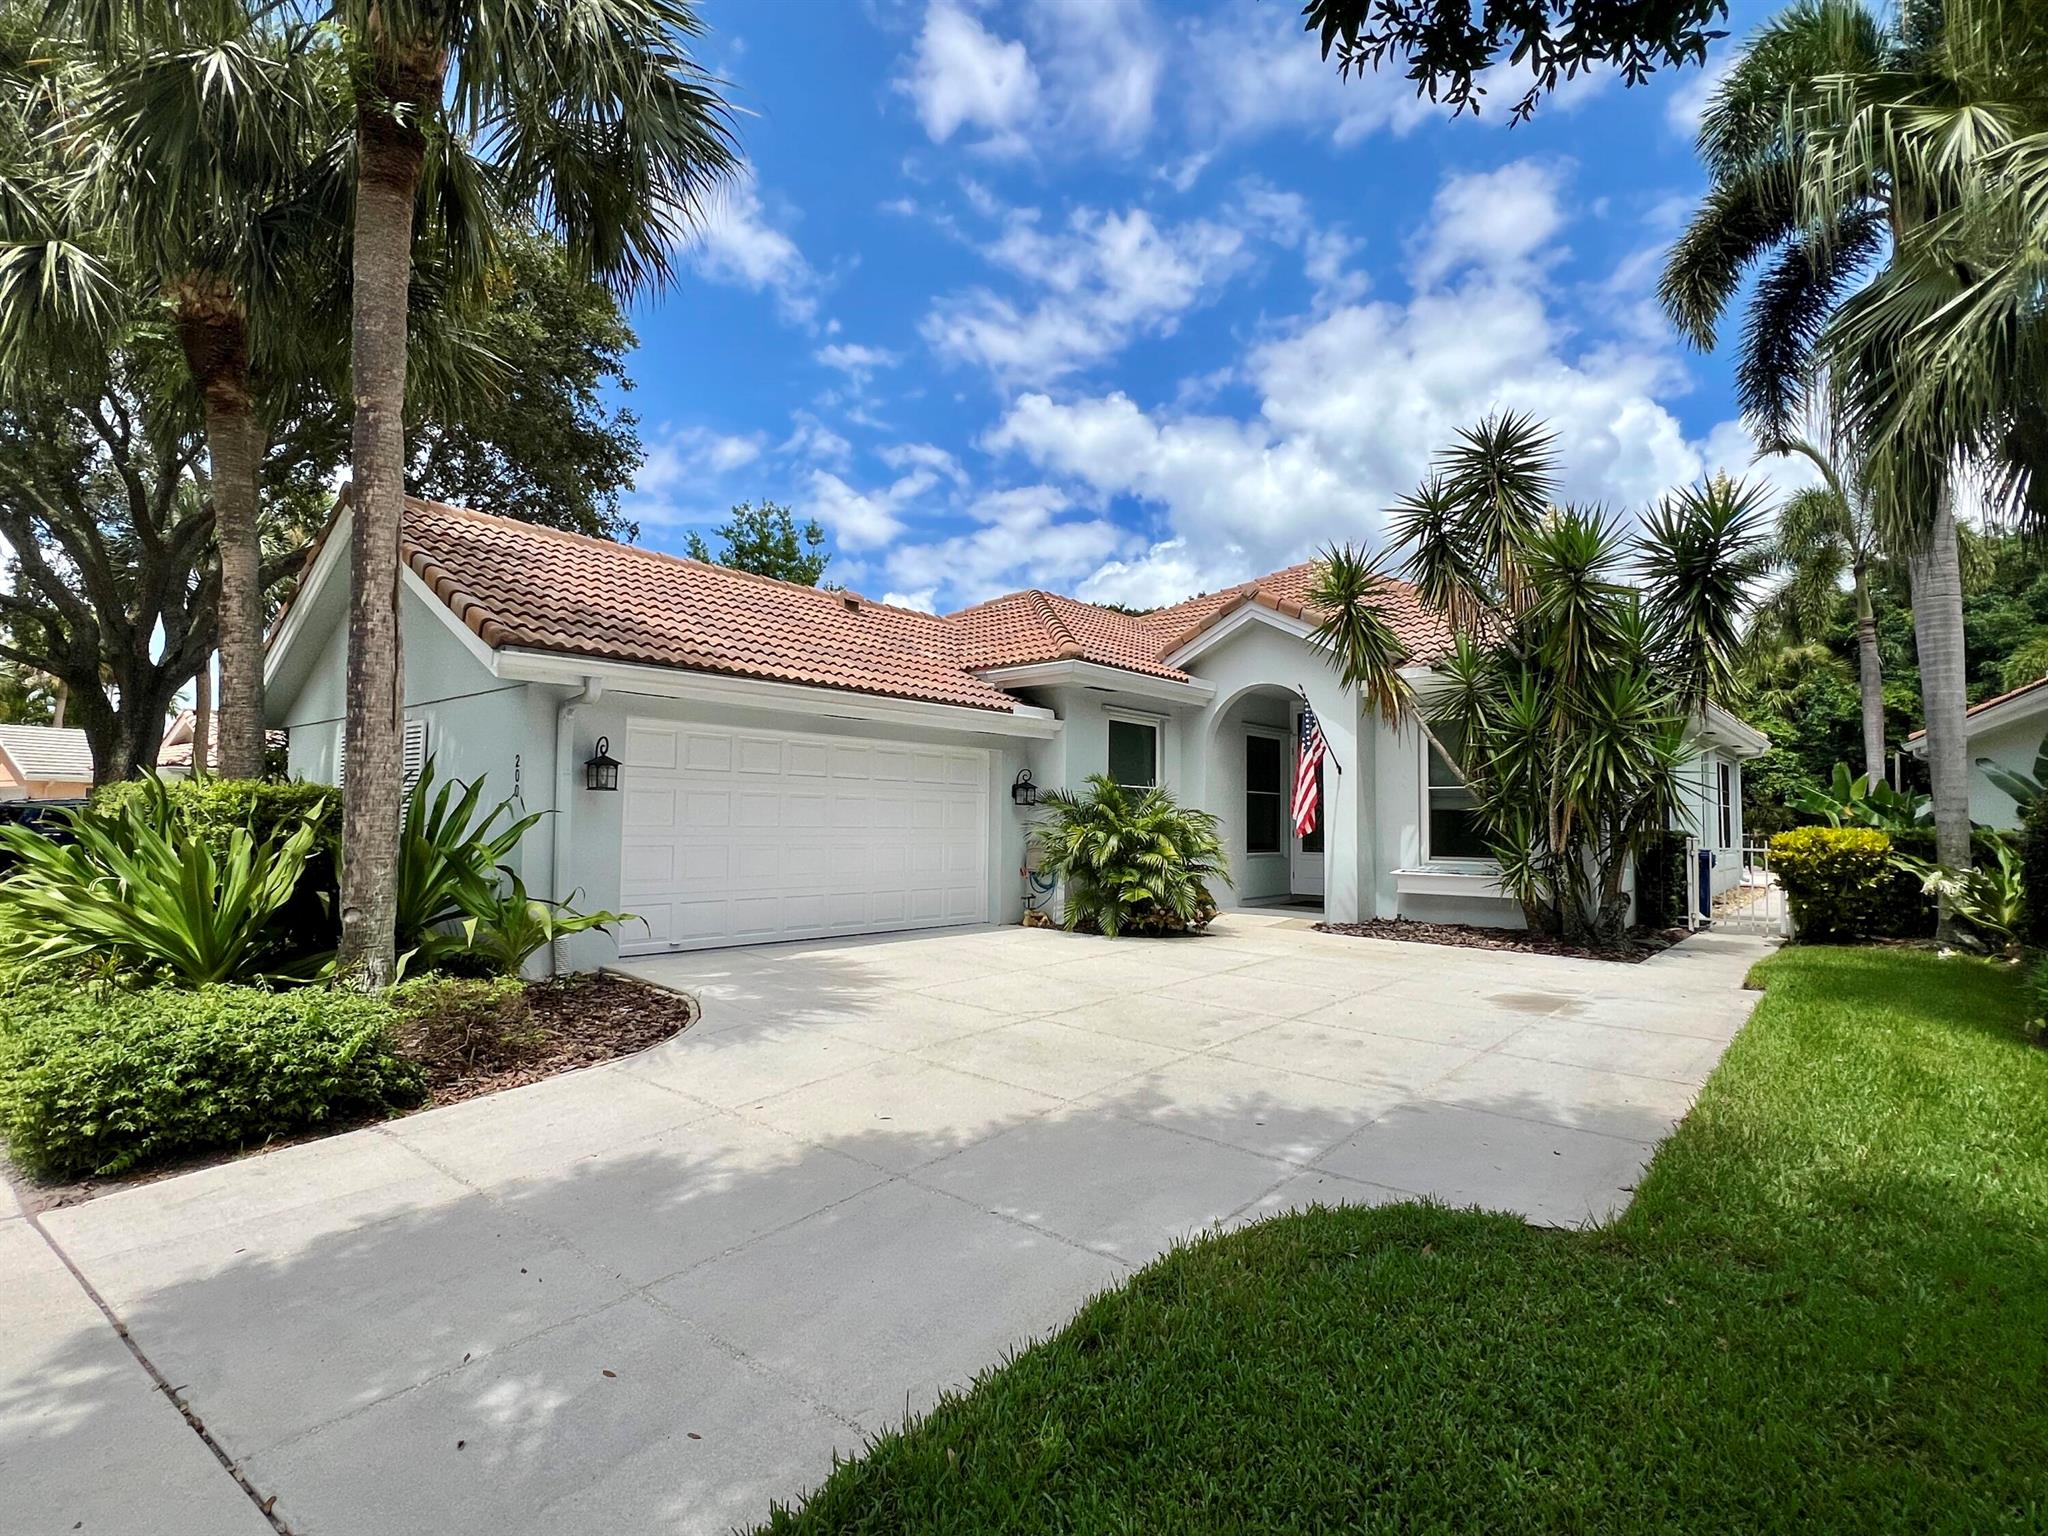 Gorgeous designer remodel in the heart of Jupiter! Only minutes to downtown Abacoa and a short drive to the beach. Upgrades include: Full impact windows, doors and sliders, ceramic tile flooring, remodeled kitchen with quartz countertops, remodeled baths, new plumbing, under cabinet lighting, updated baseboards and trim, and the list goes on. Very private yard and pool that backs to wooded green space. Quiet and peaceful setting. A real gem!